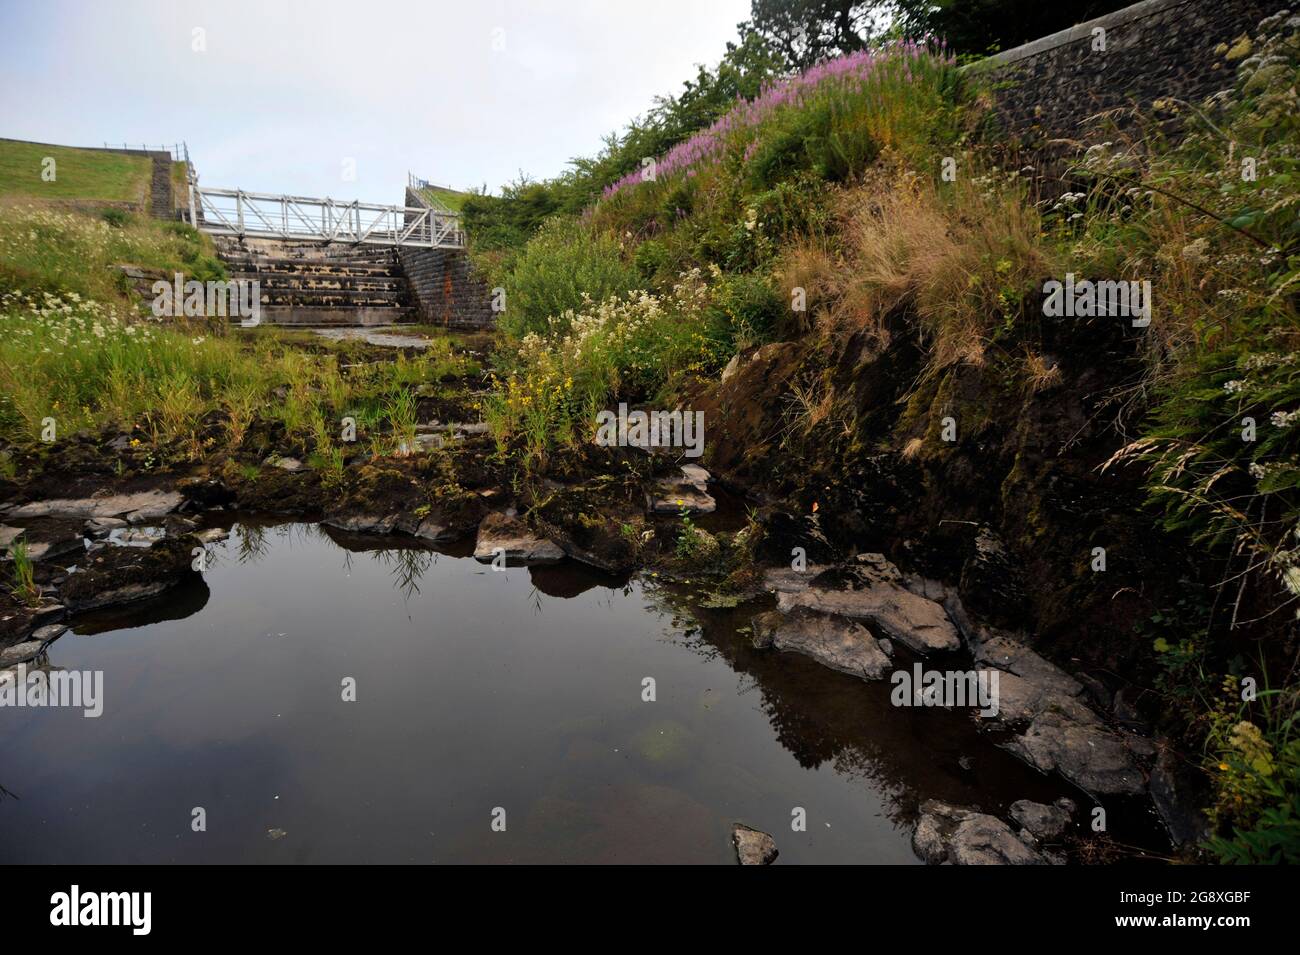 Unusually hot weather causes water levels to fall at Camphill reservoir, North Ayrshire, Scotland, the source for almost all of the areas fresh water. Stock Photo